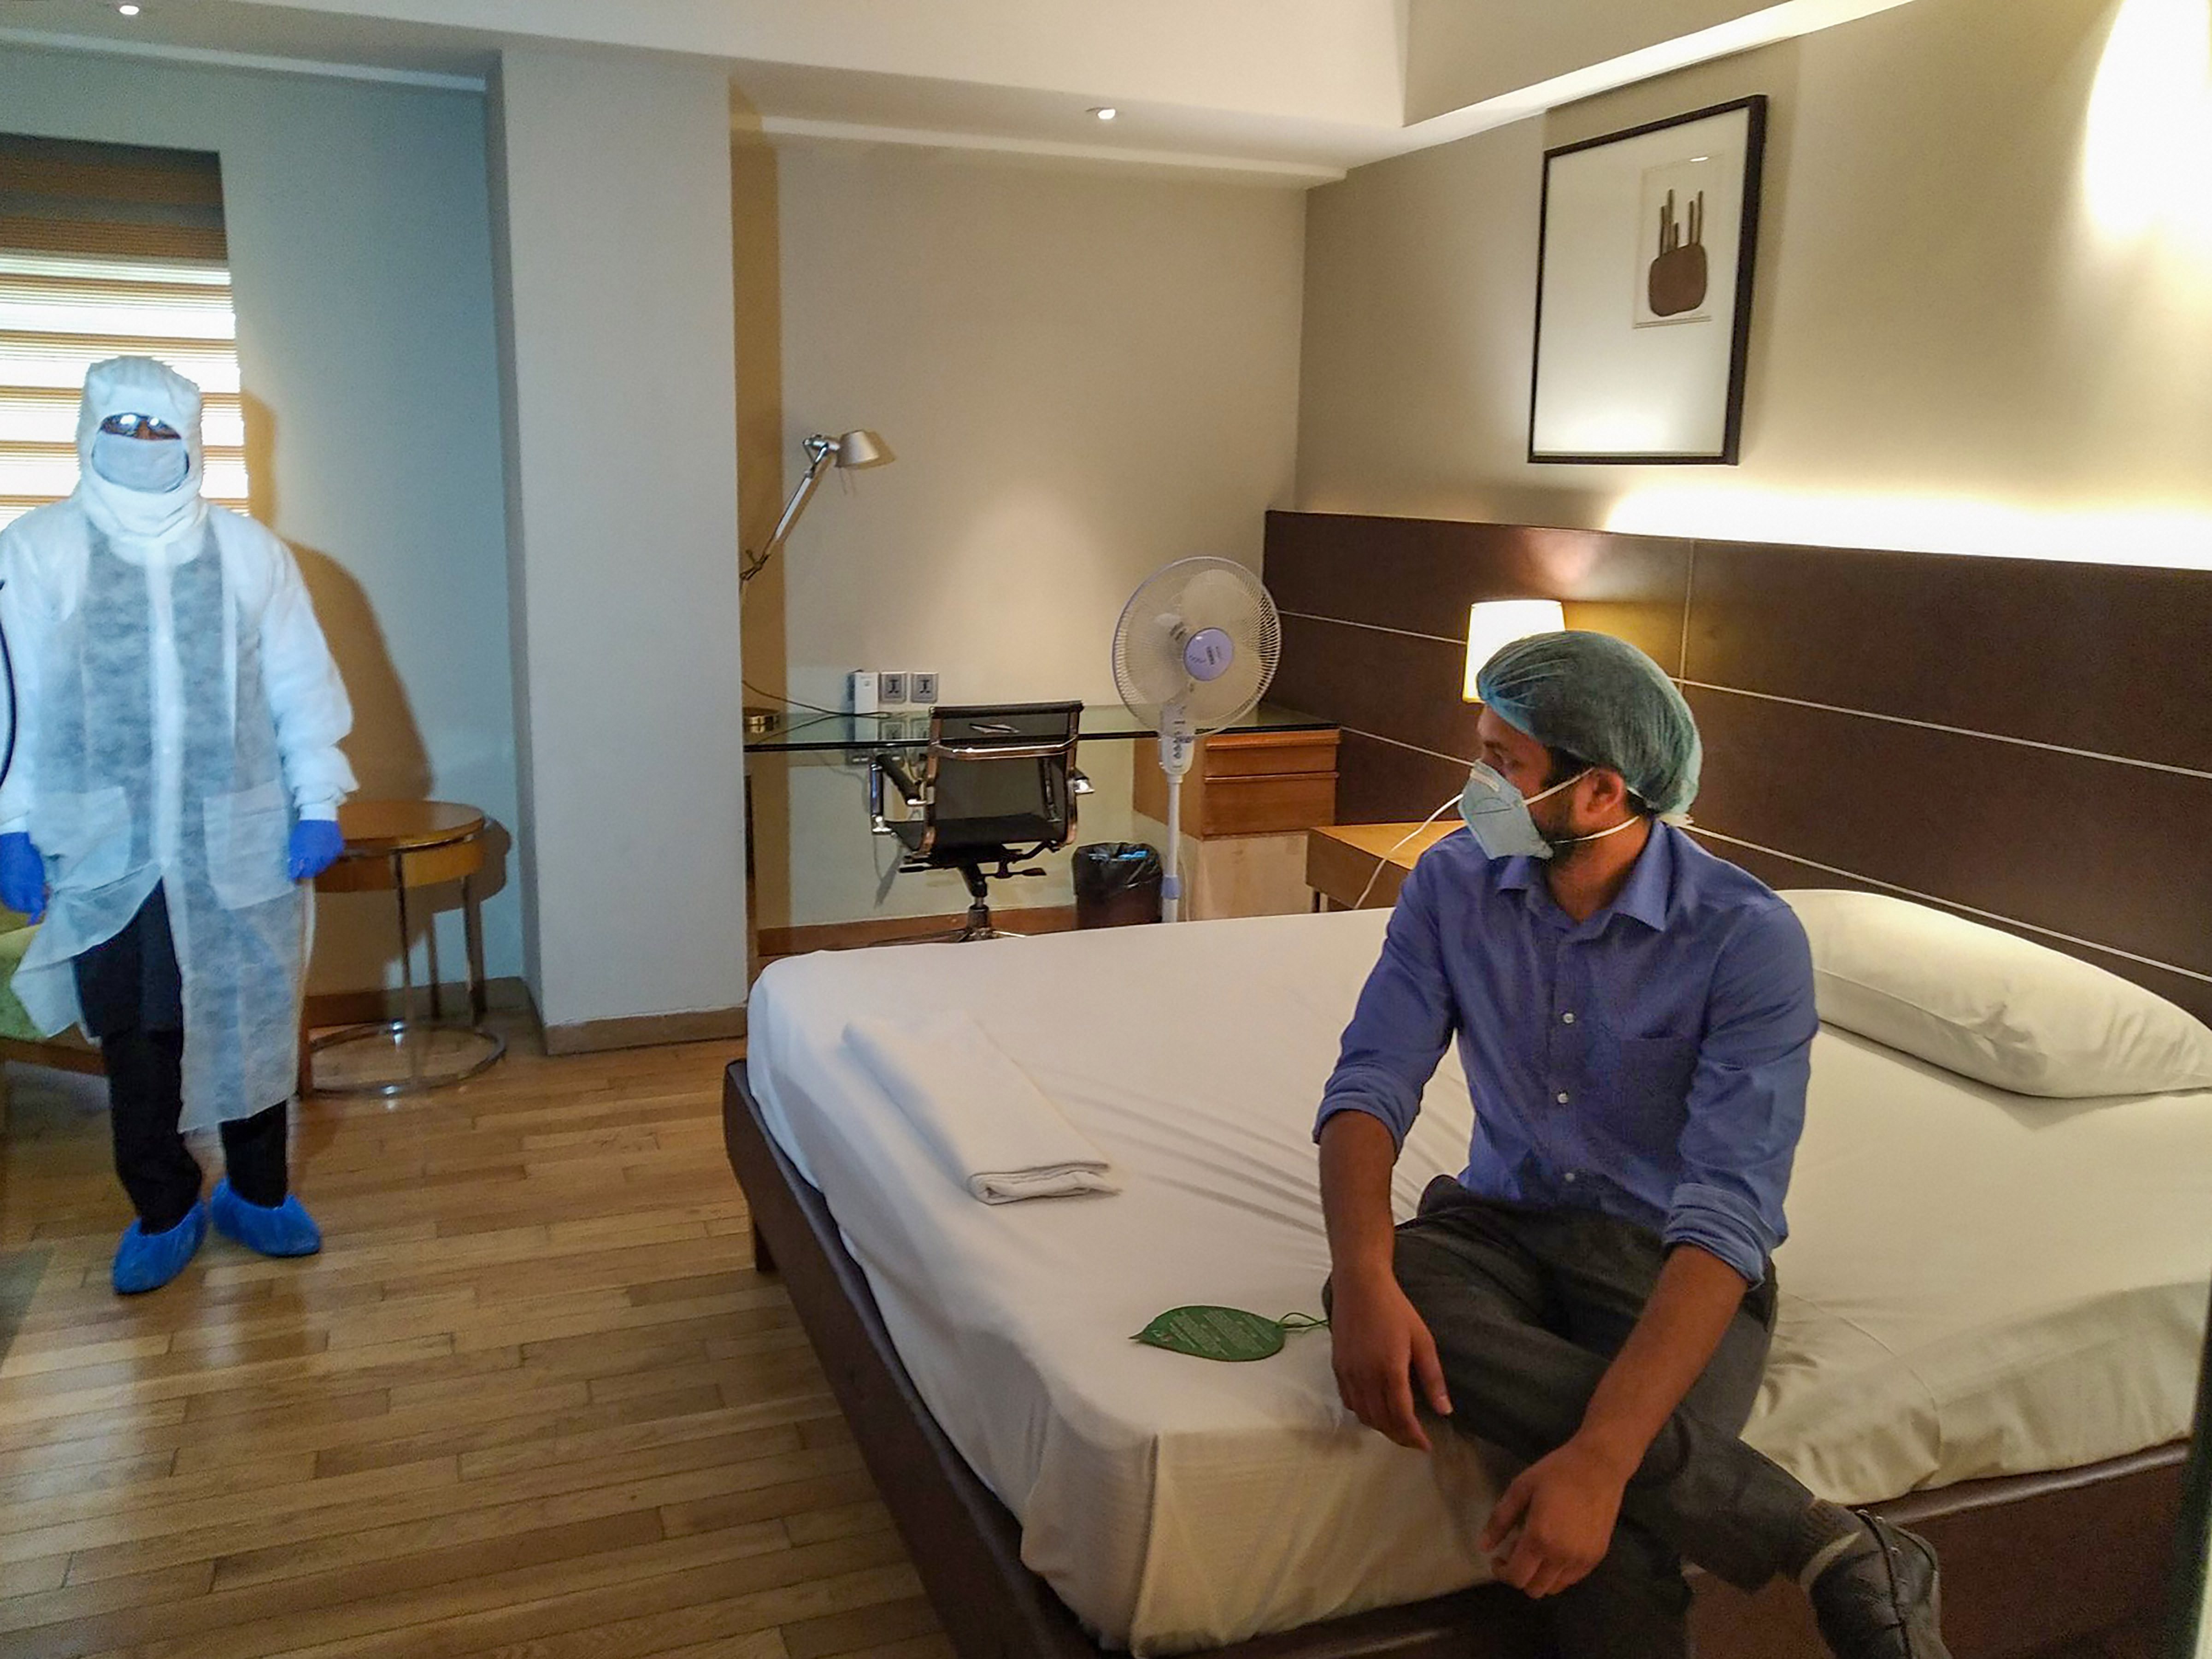 A view of accommodation facilities for doctors who are at the forefront of Covid-19 battle, in Delhi.